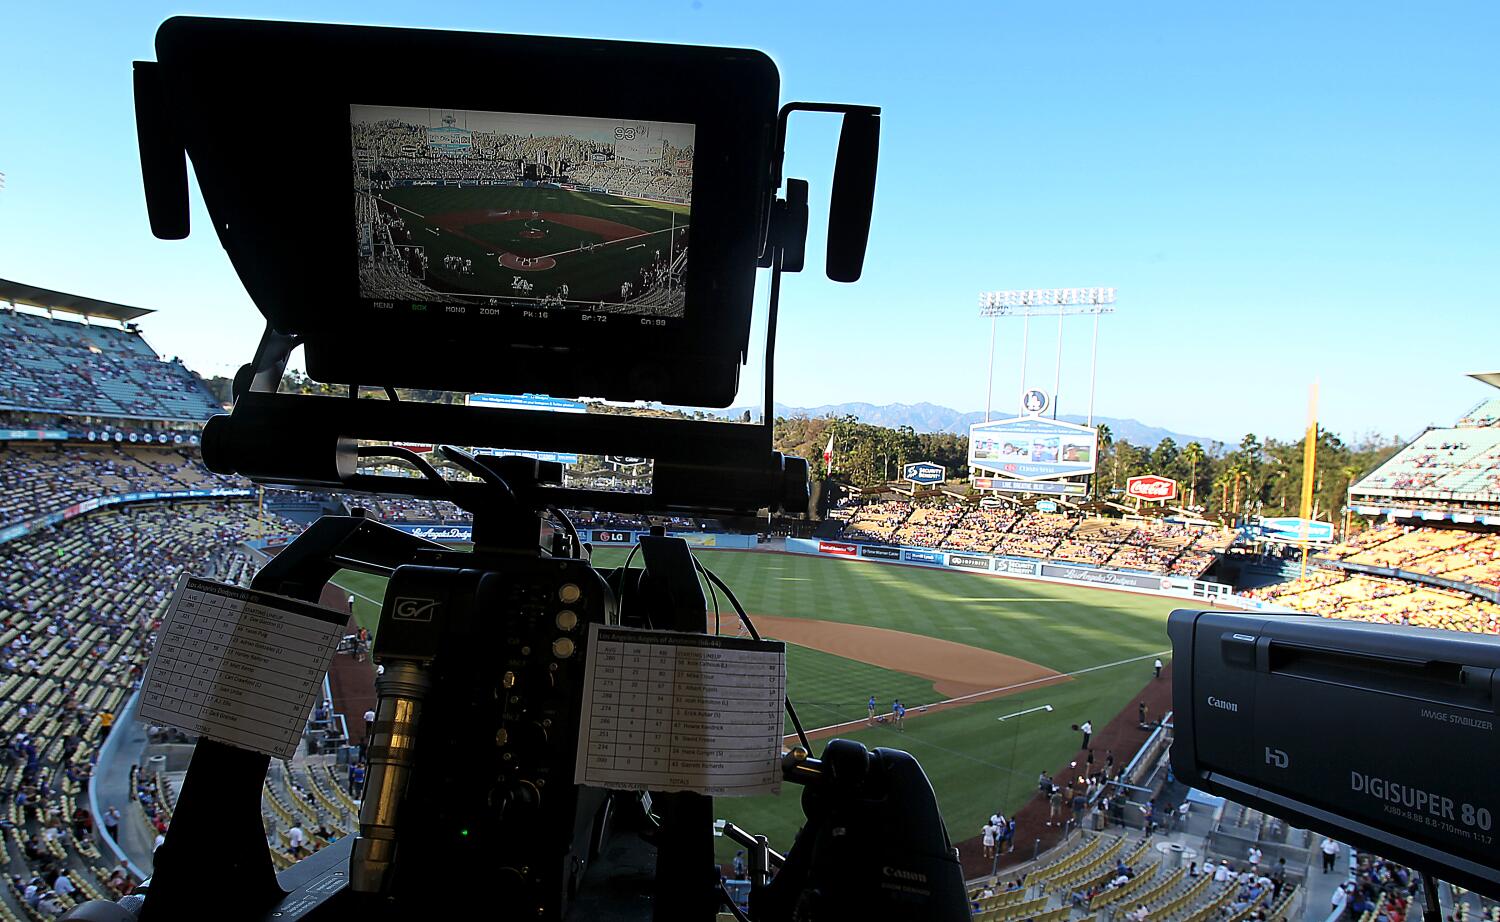 Here's how to stream Dodgers games this year, without paying for cable or satellite TV